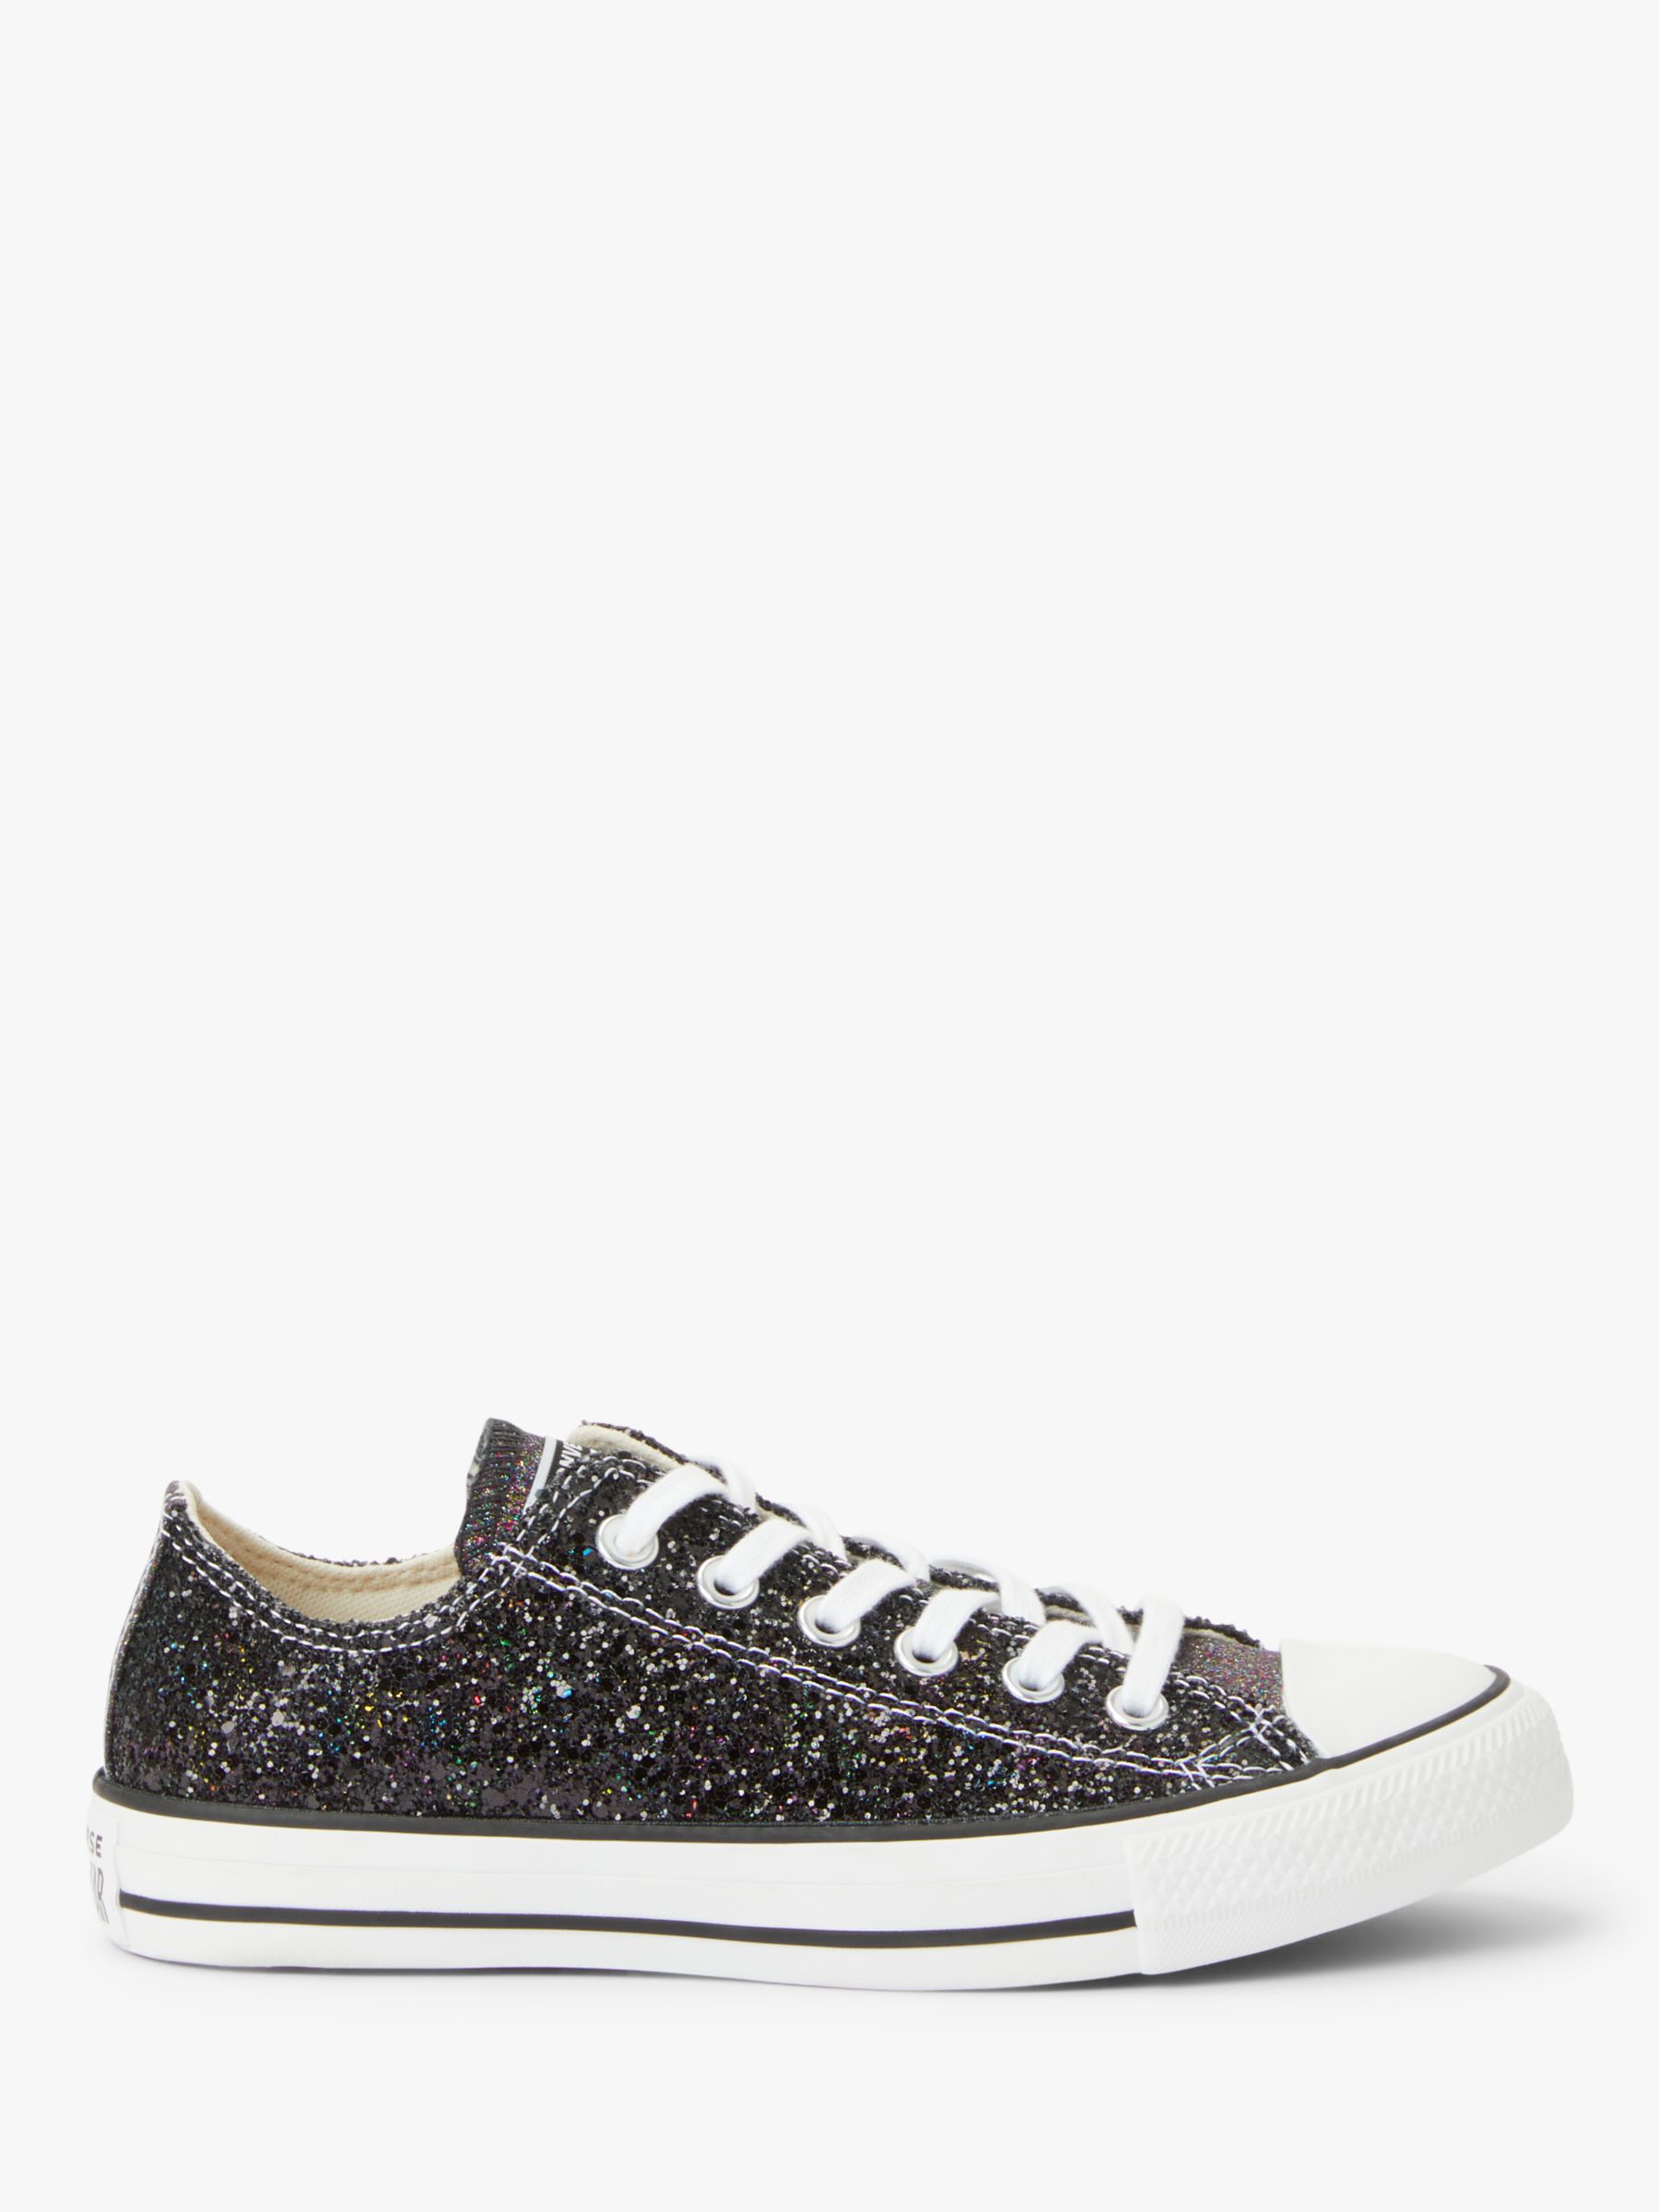 Converse Chuck Taylor All Star Glitter Low-Top Trainers, Black/Silver/White